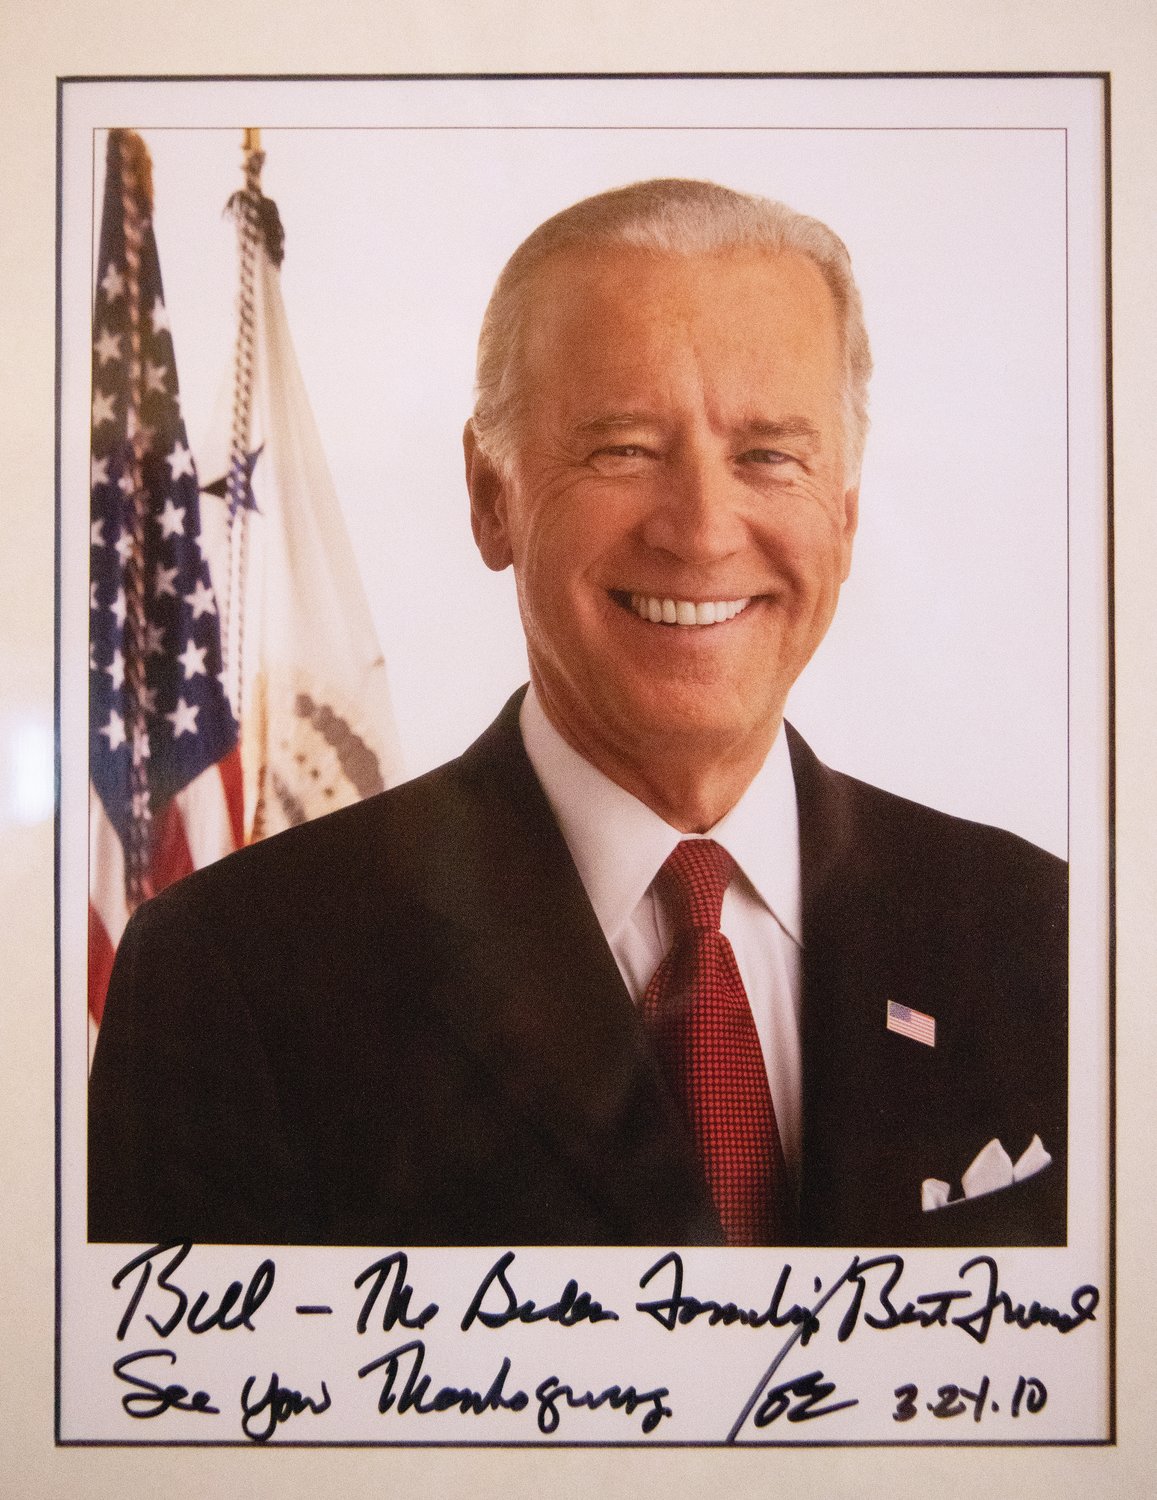 A signed photo of the then vice president also hangs in the restaurant.